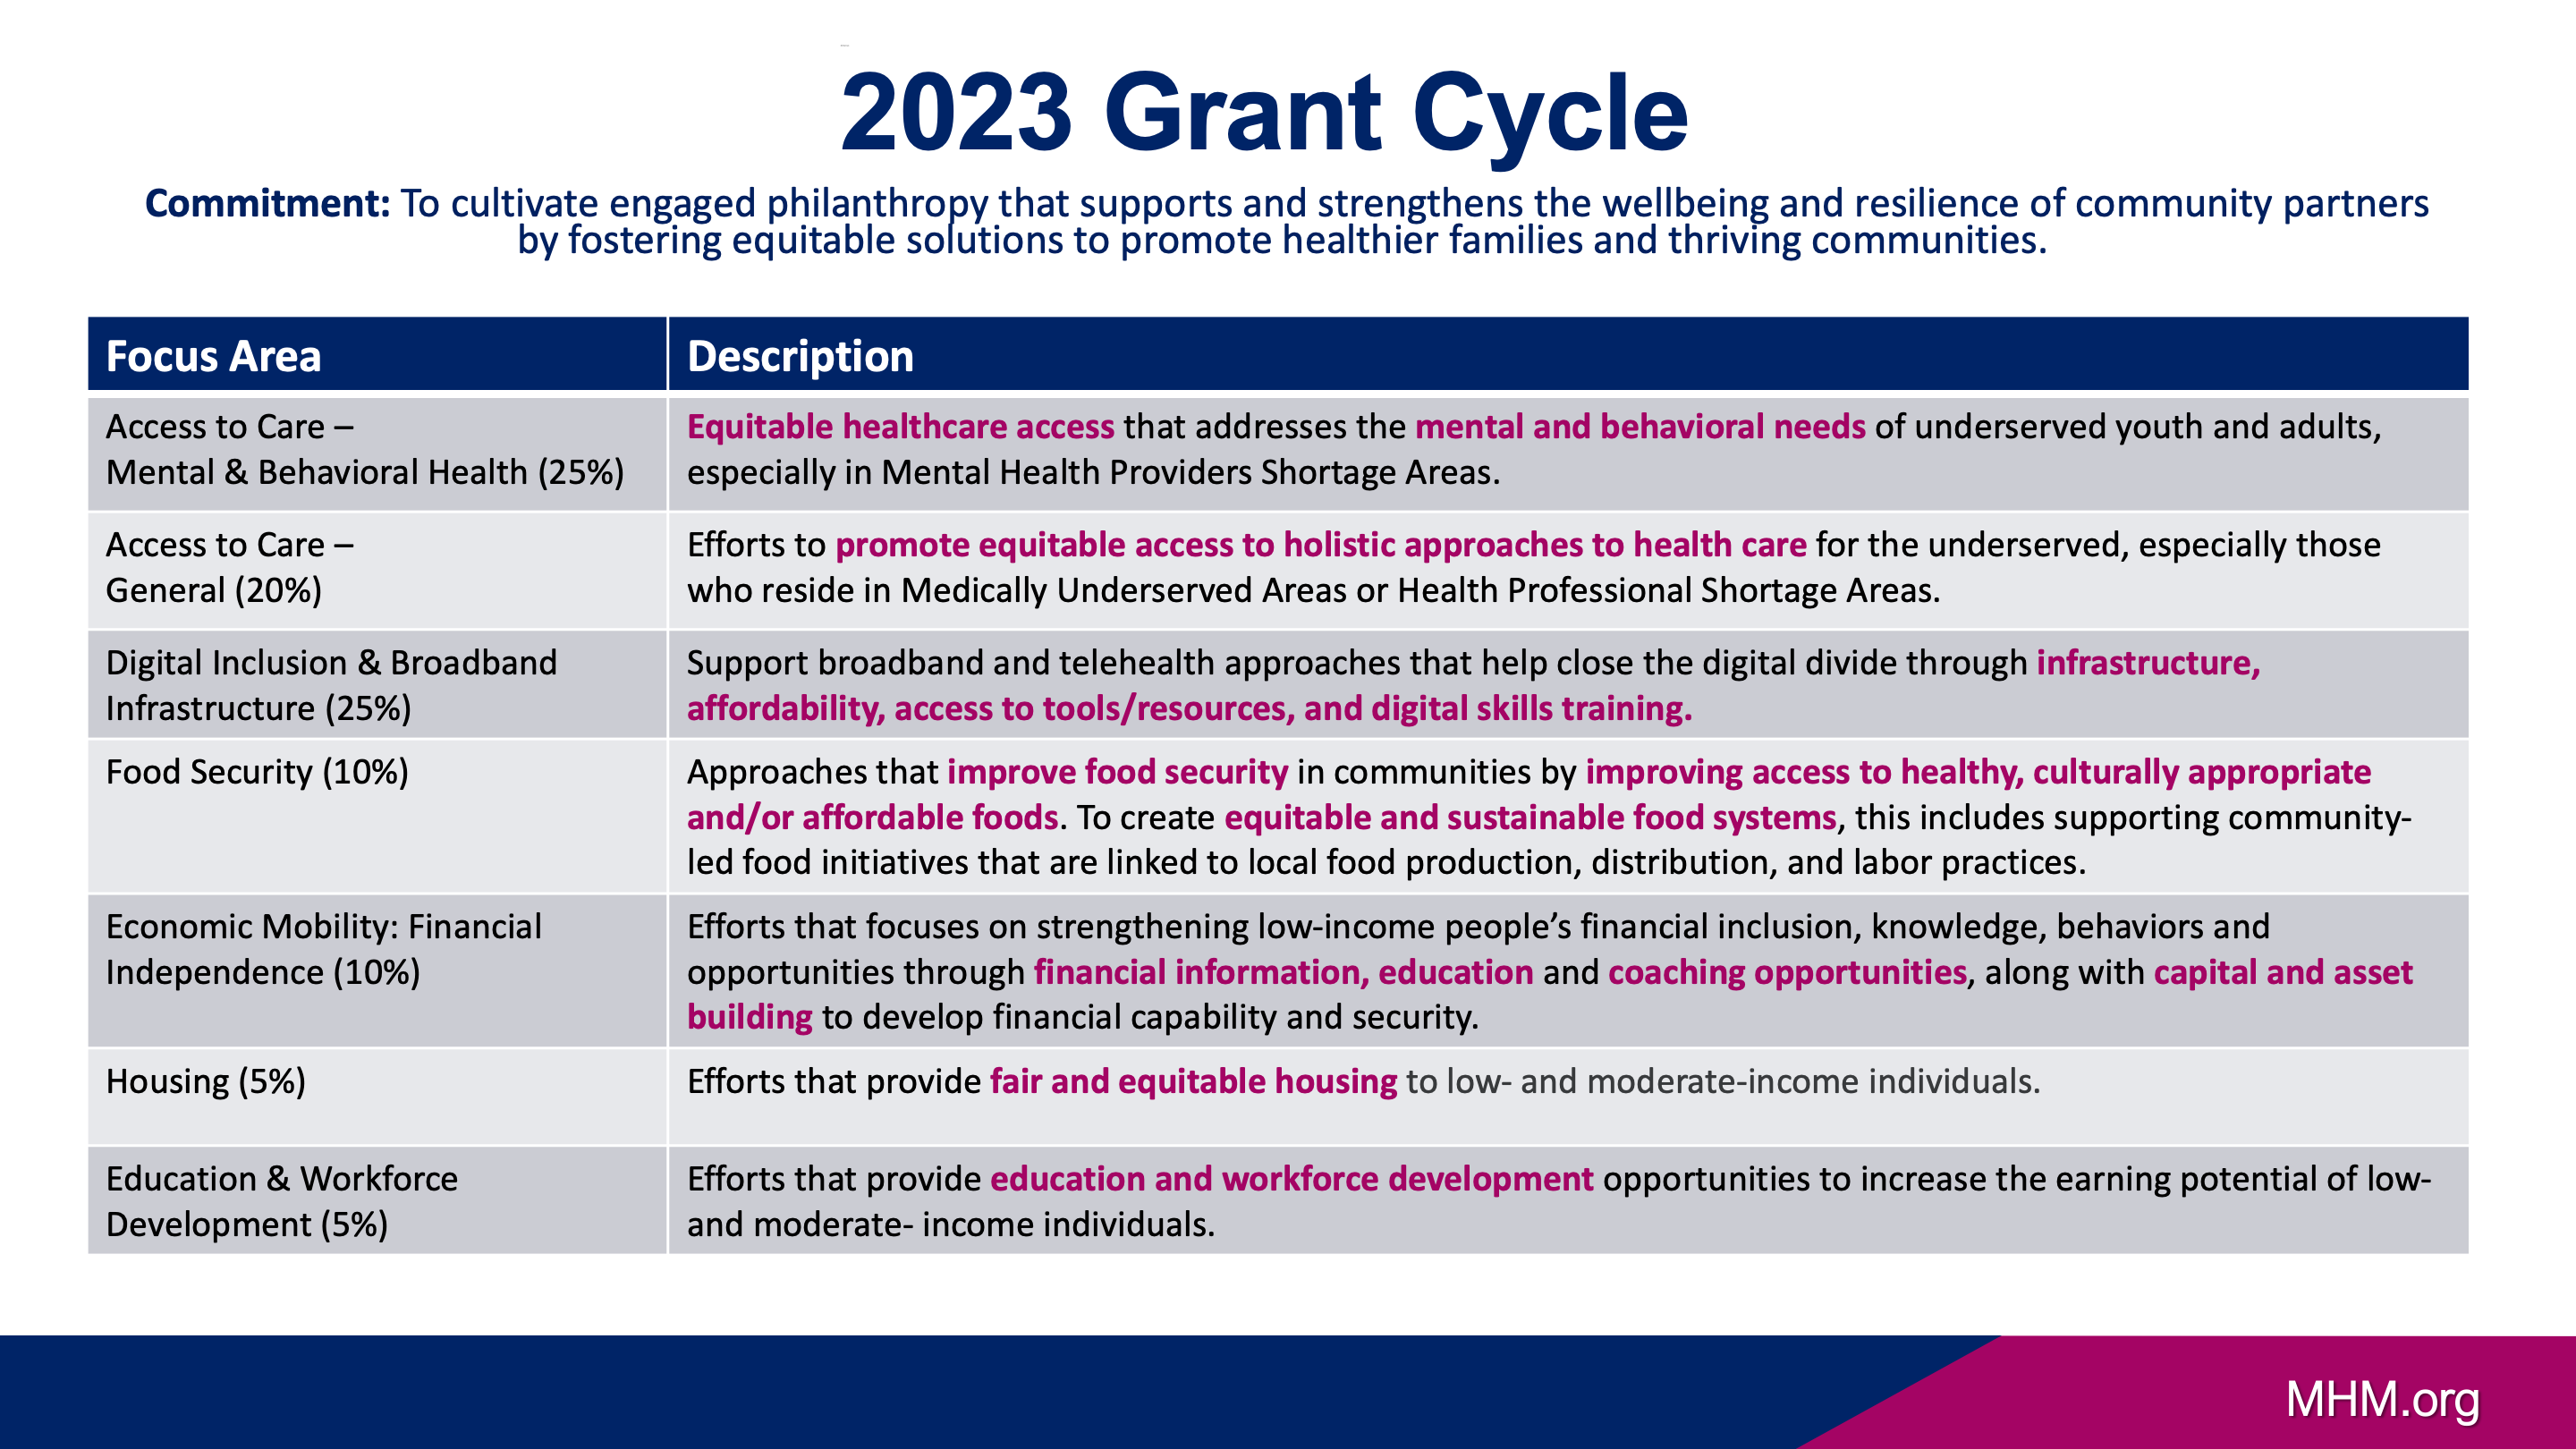 2023 Grant Cycle Focus Areas